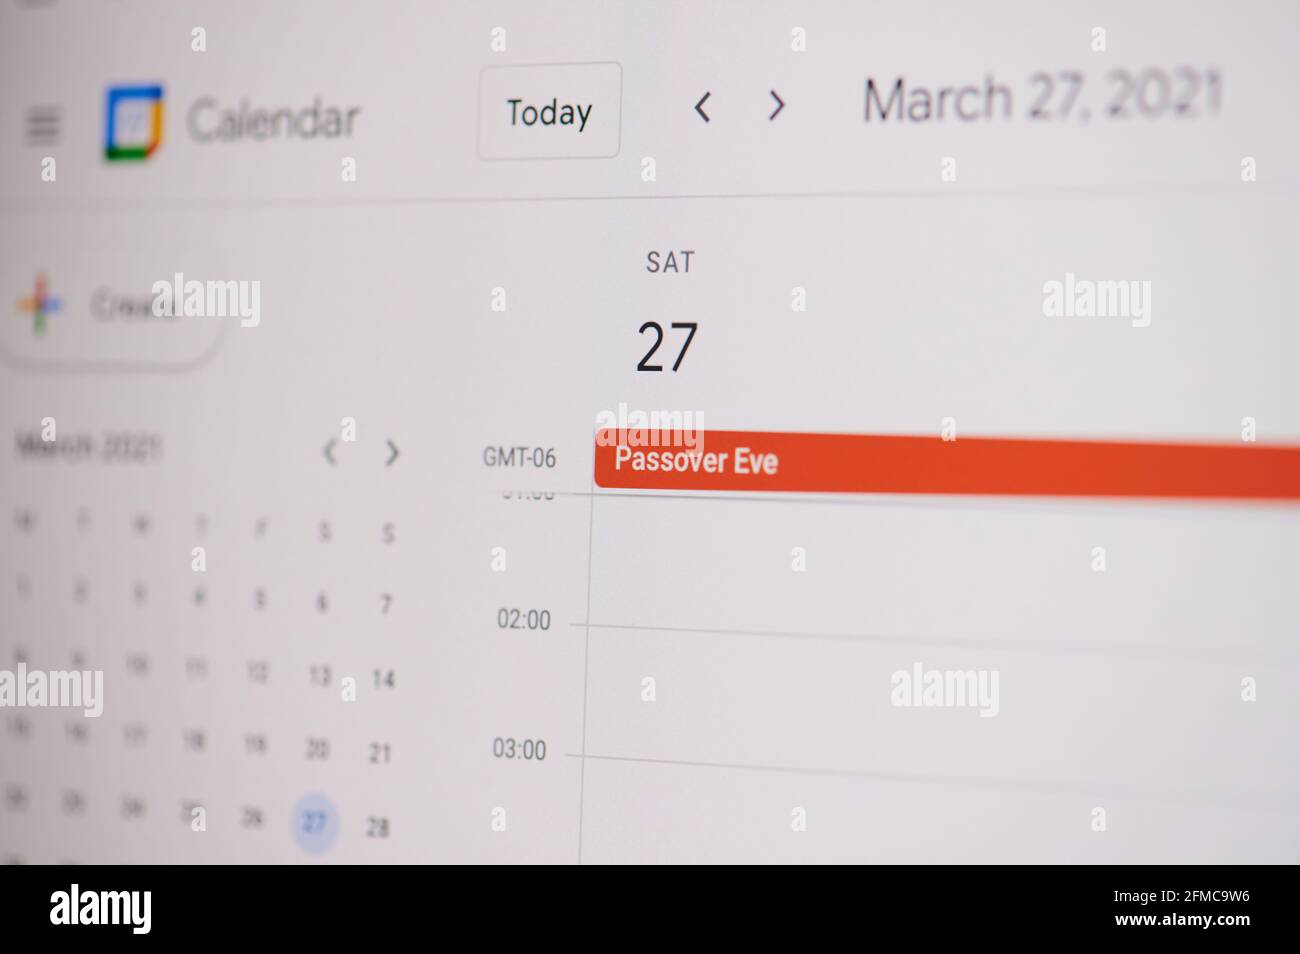 New york, USA - February 17, 2021:Passover Eve 27 of March  on google calendar on laptop screen close up view. Stock Photo